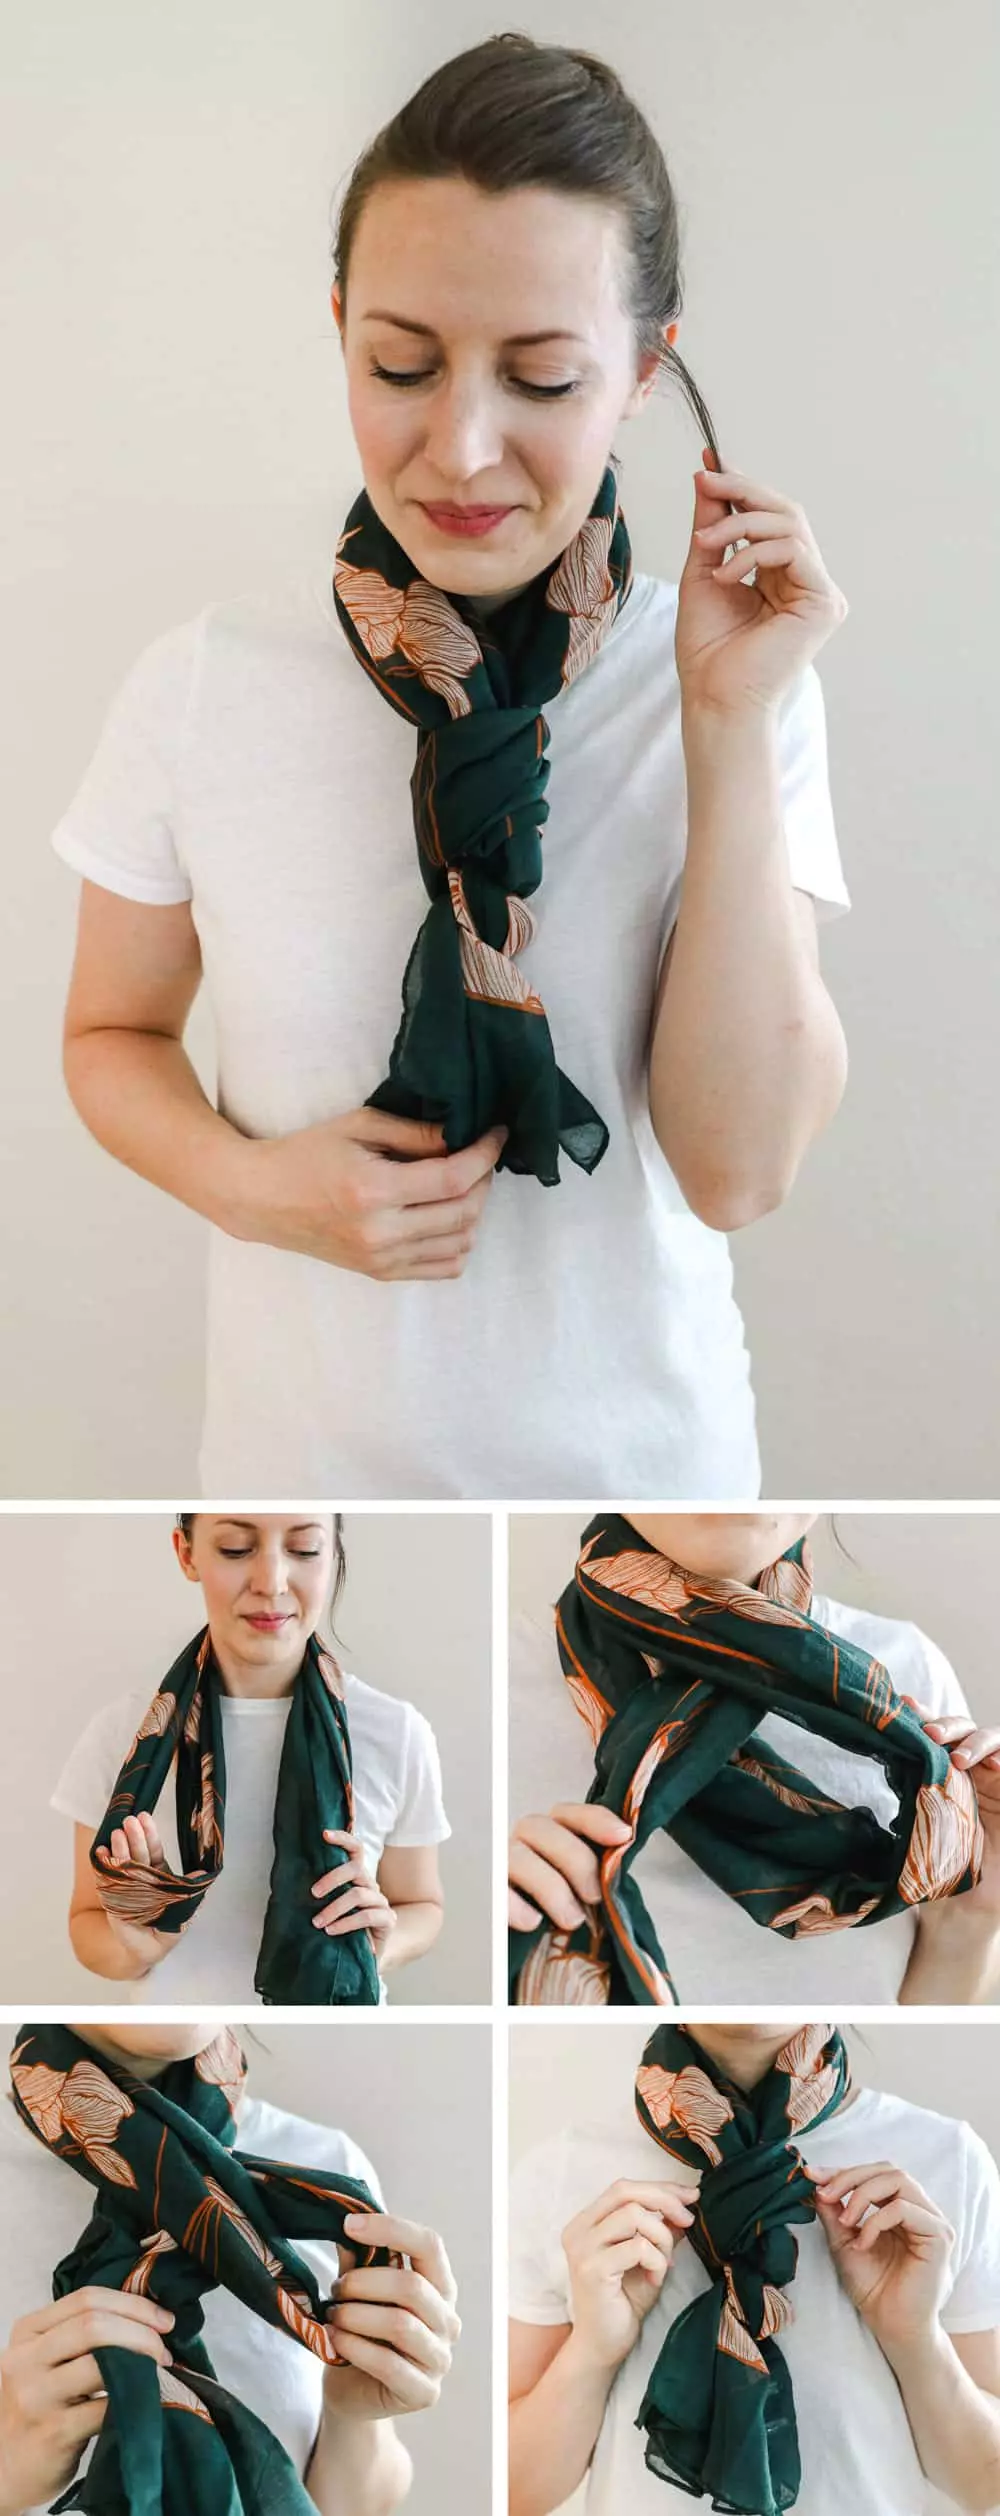 The Cowl | 19 Ways to Tie a Scarf